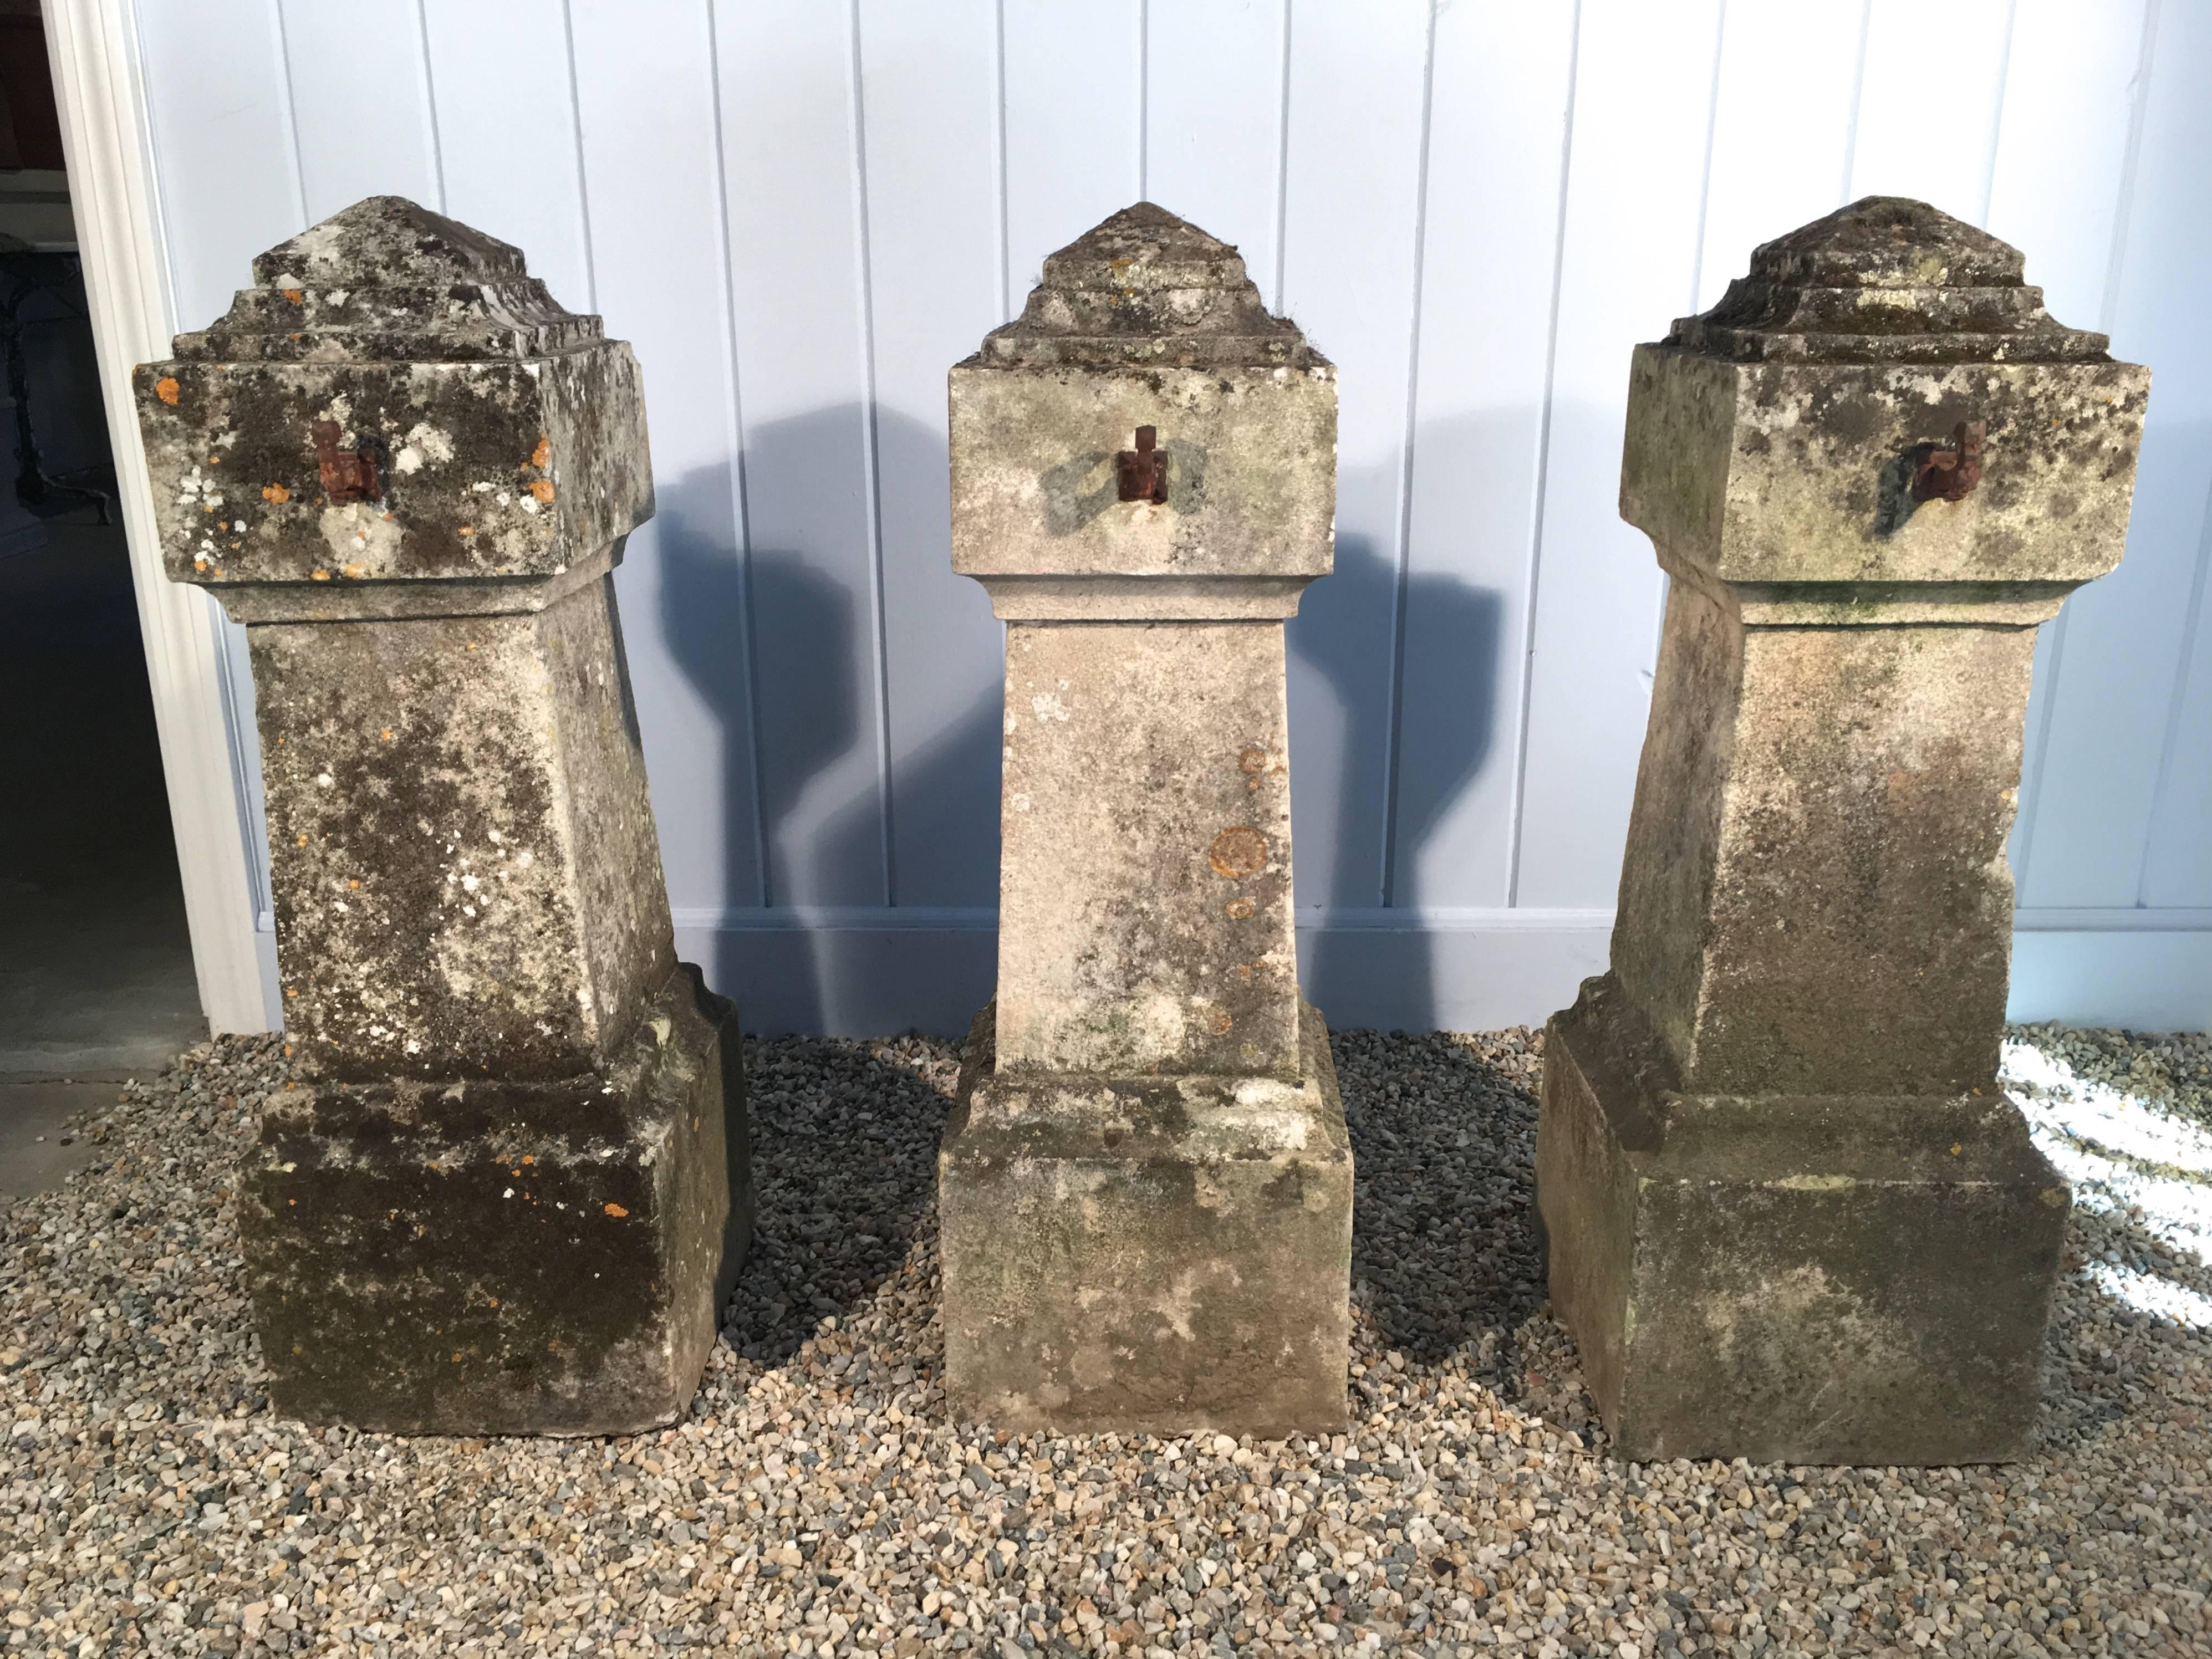 This is a rare and sensational set of three hand-carved 18th century French limestone entrance pillars/bollards with original wrought iron chain hooks that come with two pieces of 19th C hand-wrought heavy chain, each measuring 72 inches long.